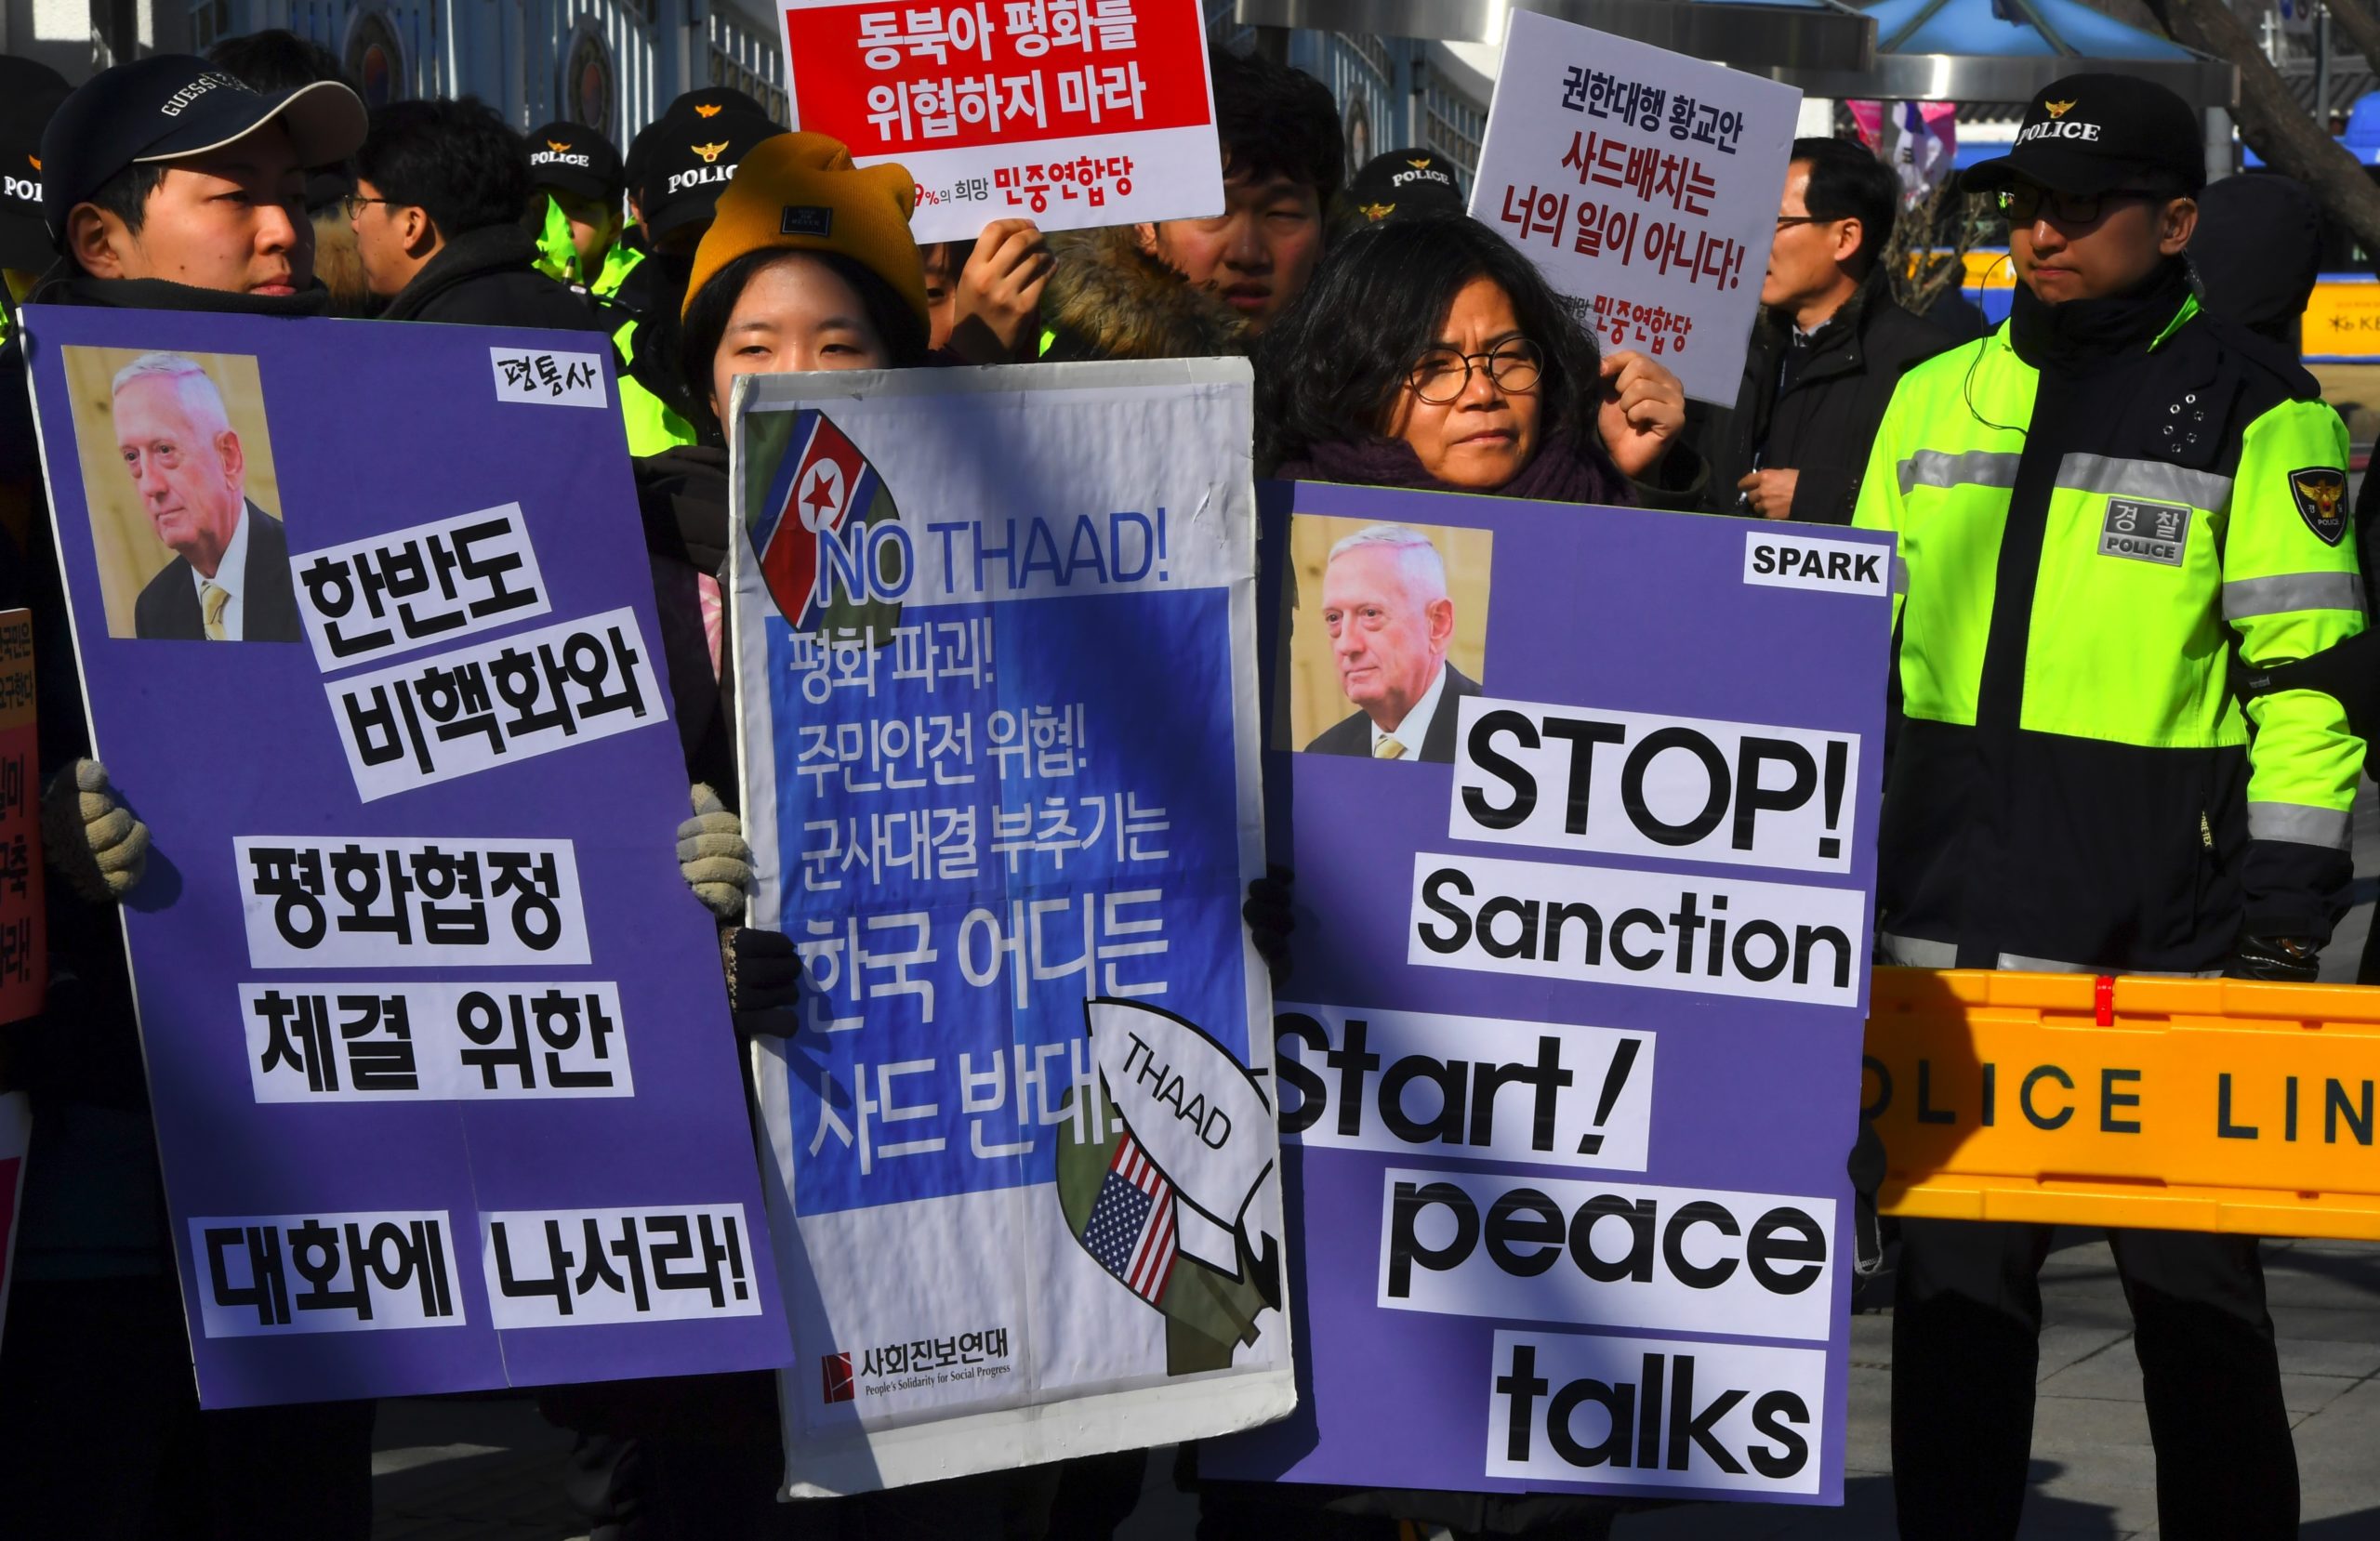 South Korean anti-war activists hold placards during a rally against the visit of the US Defense Secretary James Mattis in Seoul on February 2, 2017 as they denounce the planned deployment of the US-built Terminal High Altitude Area Defense, THAAD. Mattis will meet with South Korean Defense Minister Han Min-Koo and other senior officials as the meetings are expected to focus on ways to cope with North Korean threats and further strengthen the alliance.